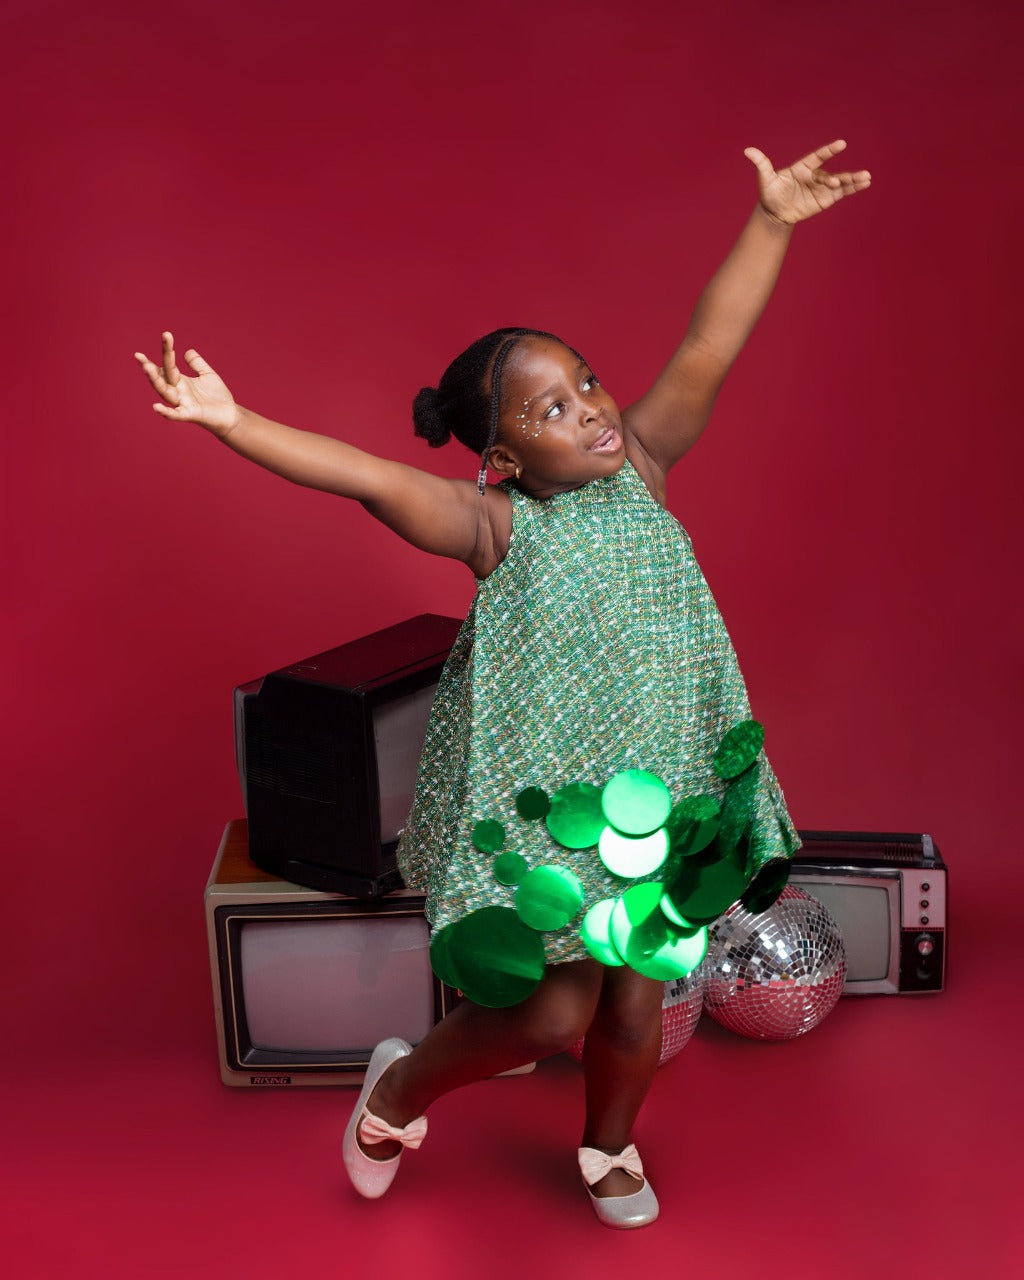 A kid model wearing a Green dress with sequins embellishment in a red room